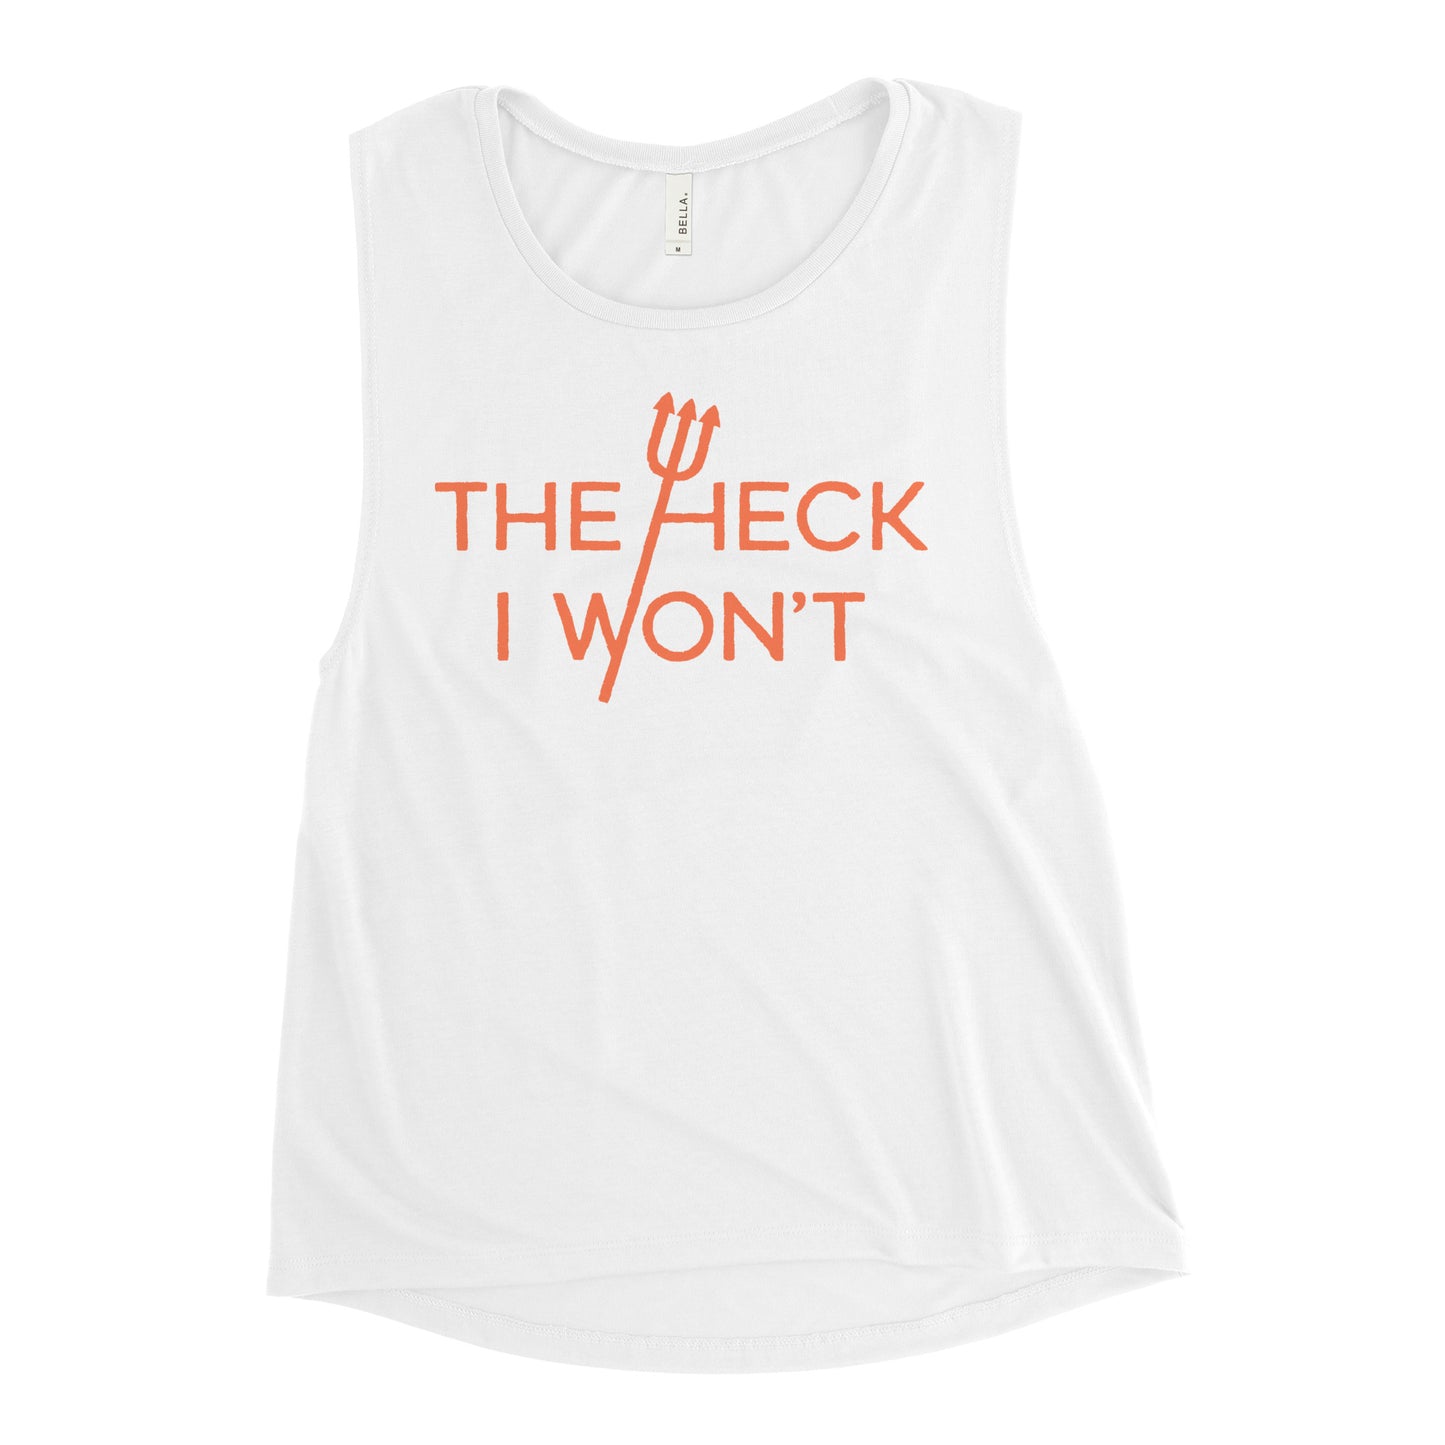 The Heck I Won't Women's Muscle Tank